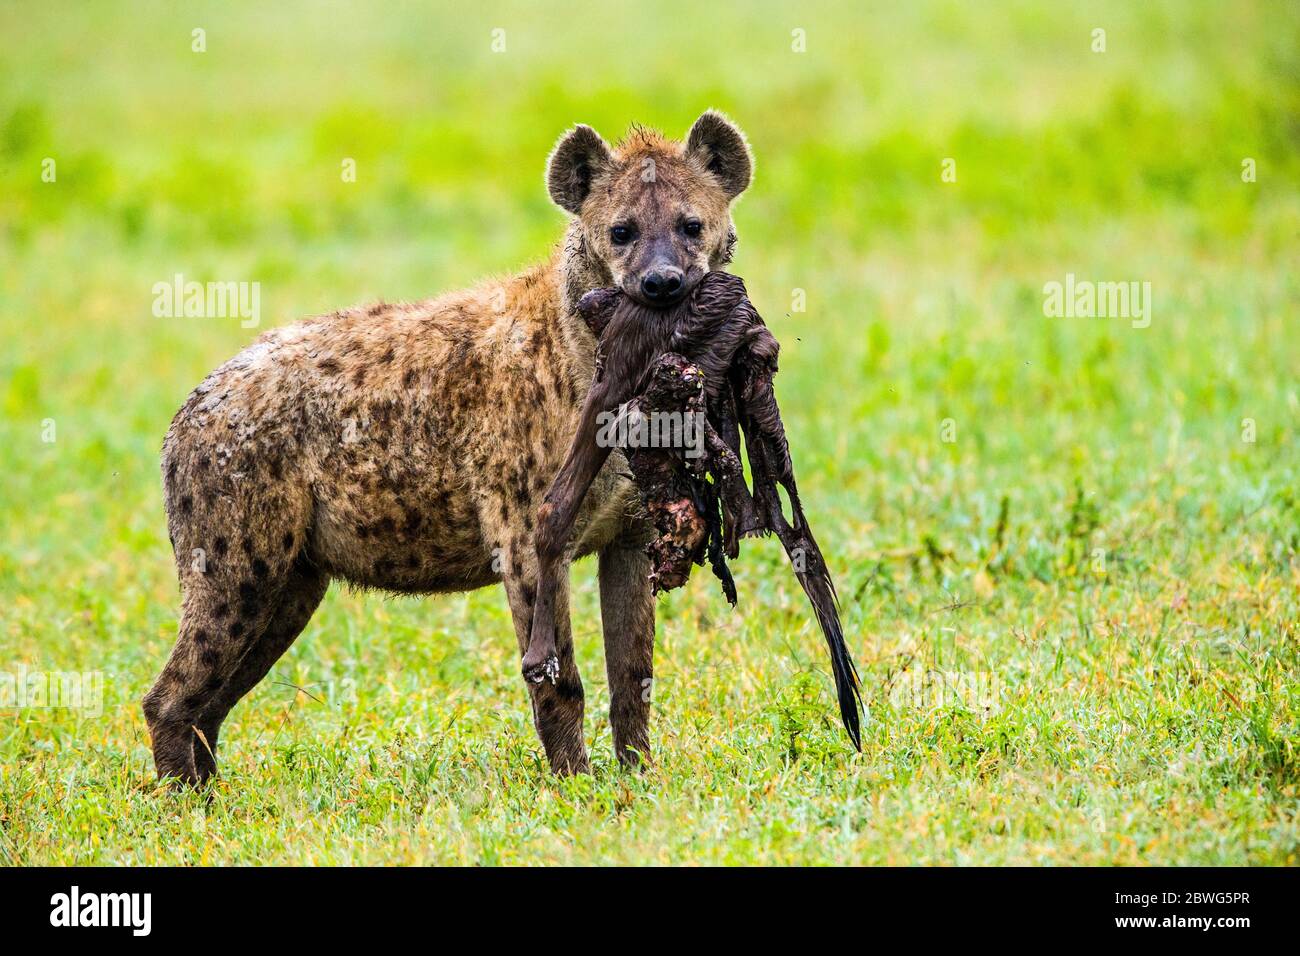 Spotted hyena (Crocuta crocuta) with prey in mouth, Ngorongoro Conservation Area, Tanzania, Africa Stock Photo